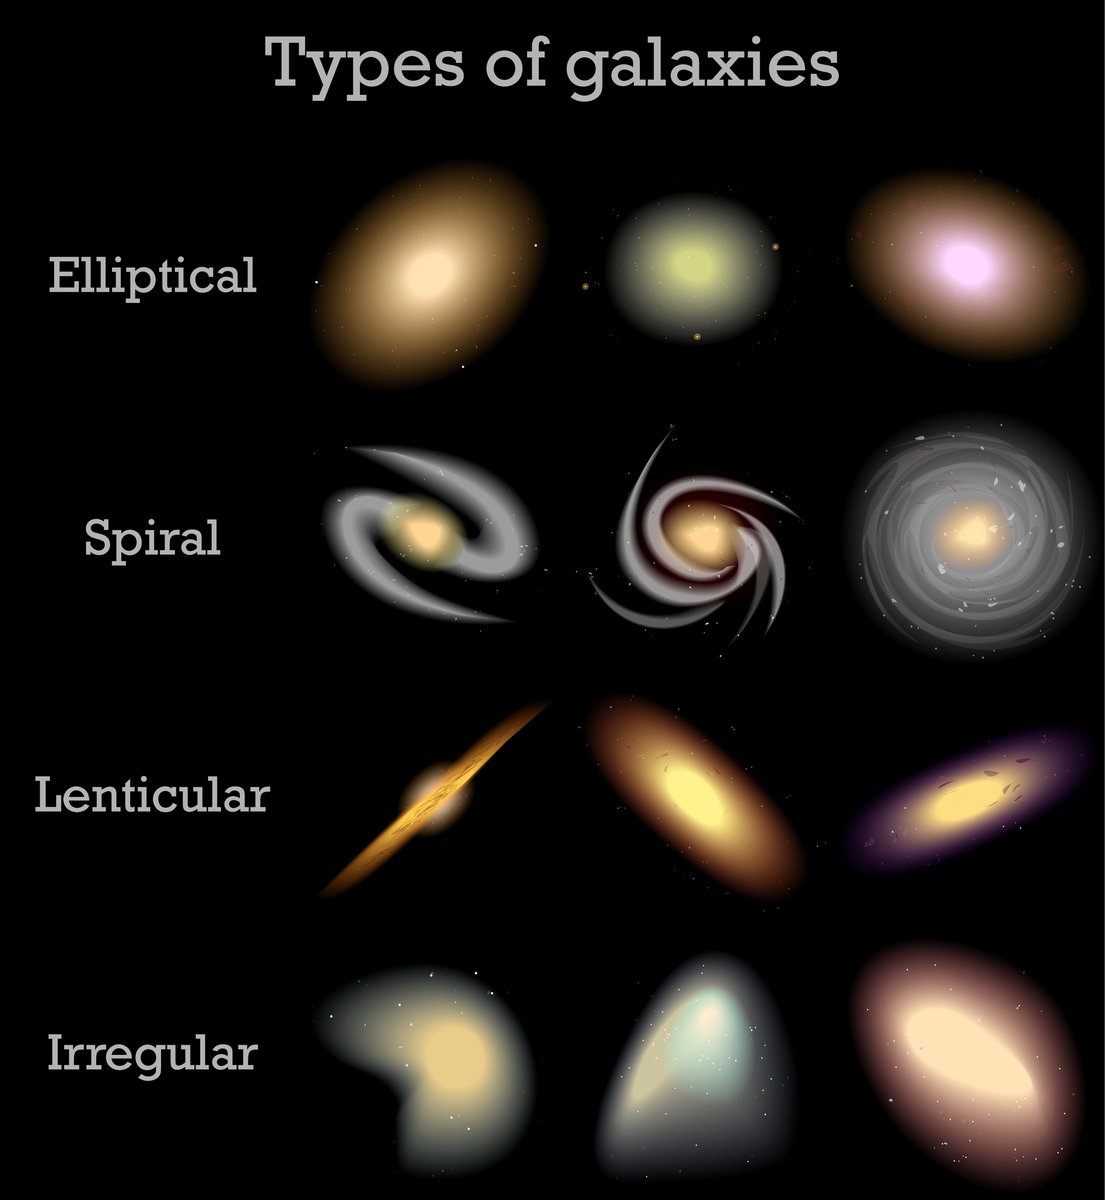 RT @universal_sci: Different types of galaxies https://t.co/iOnH95lrJa